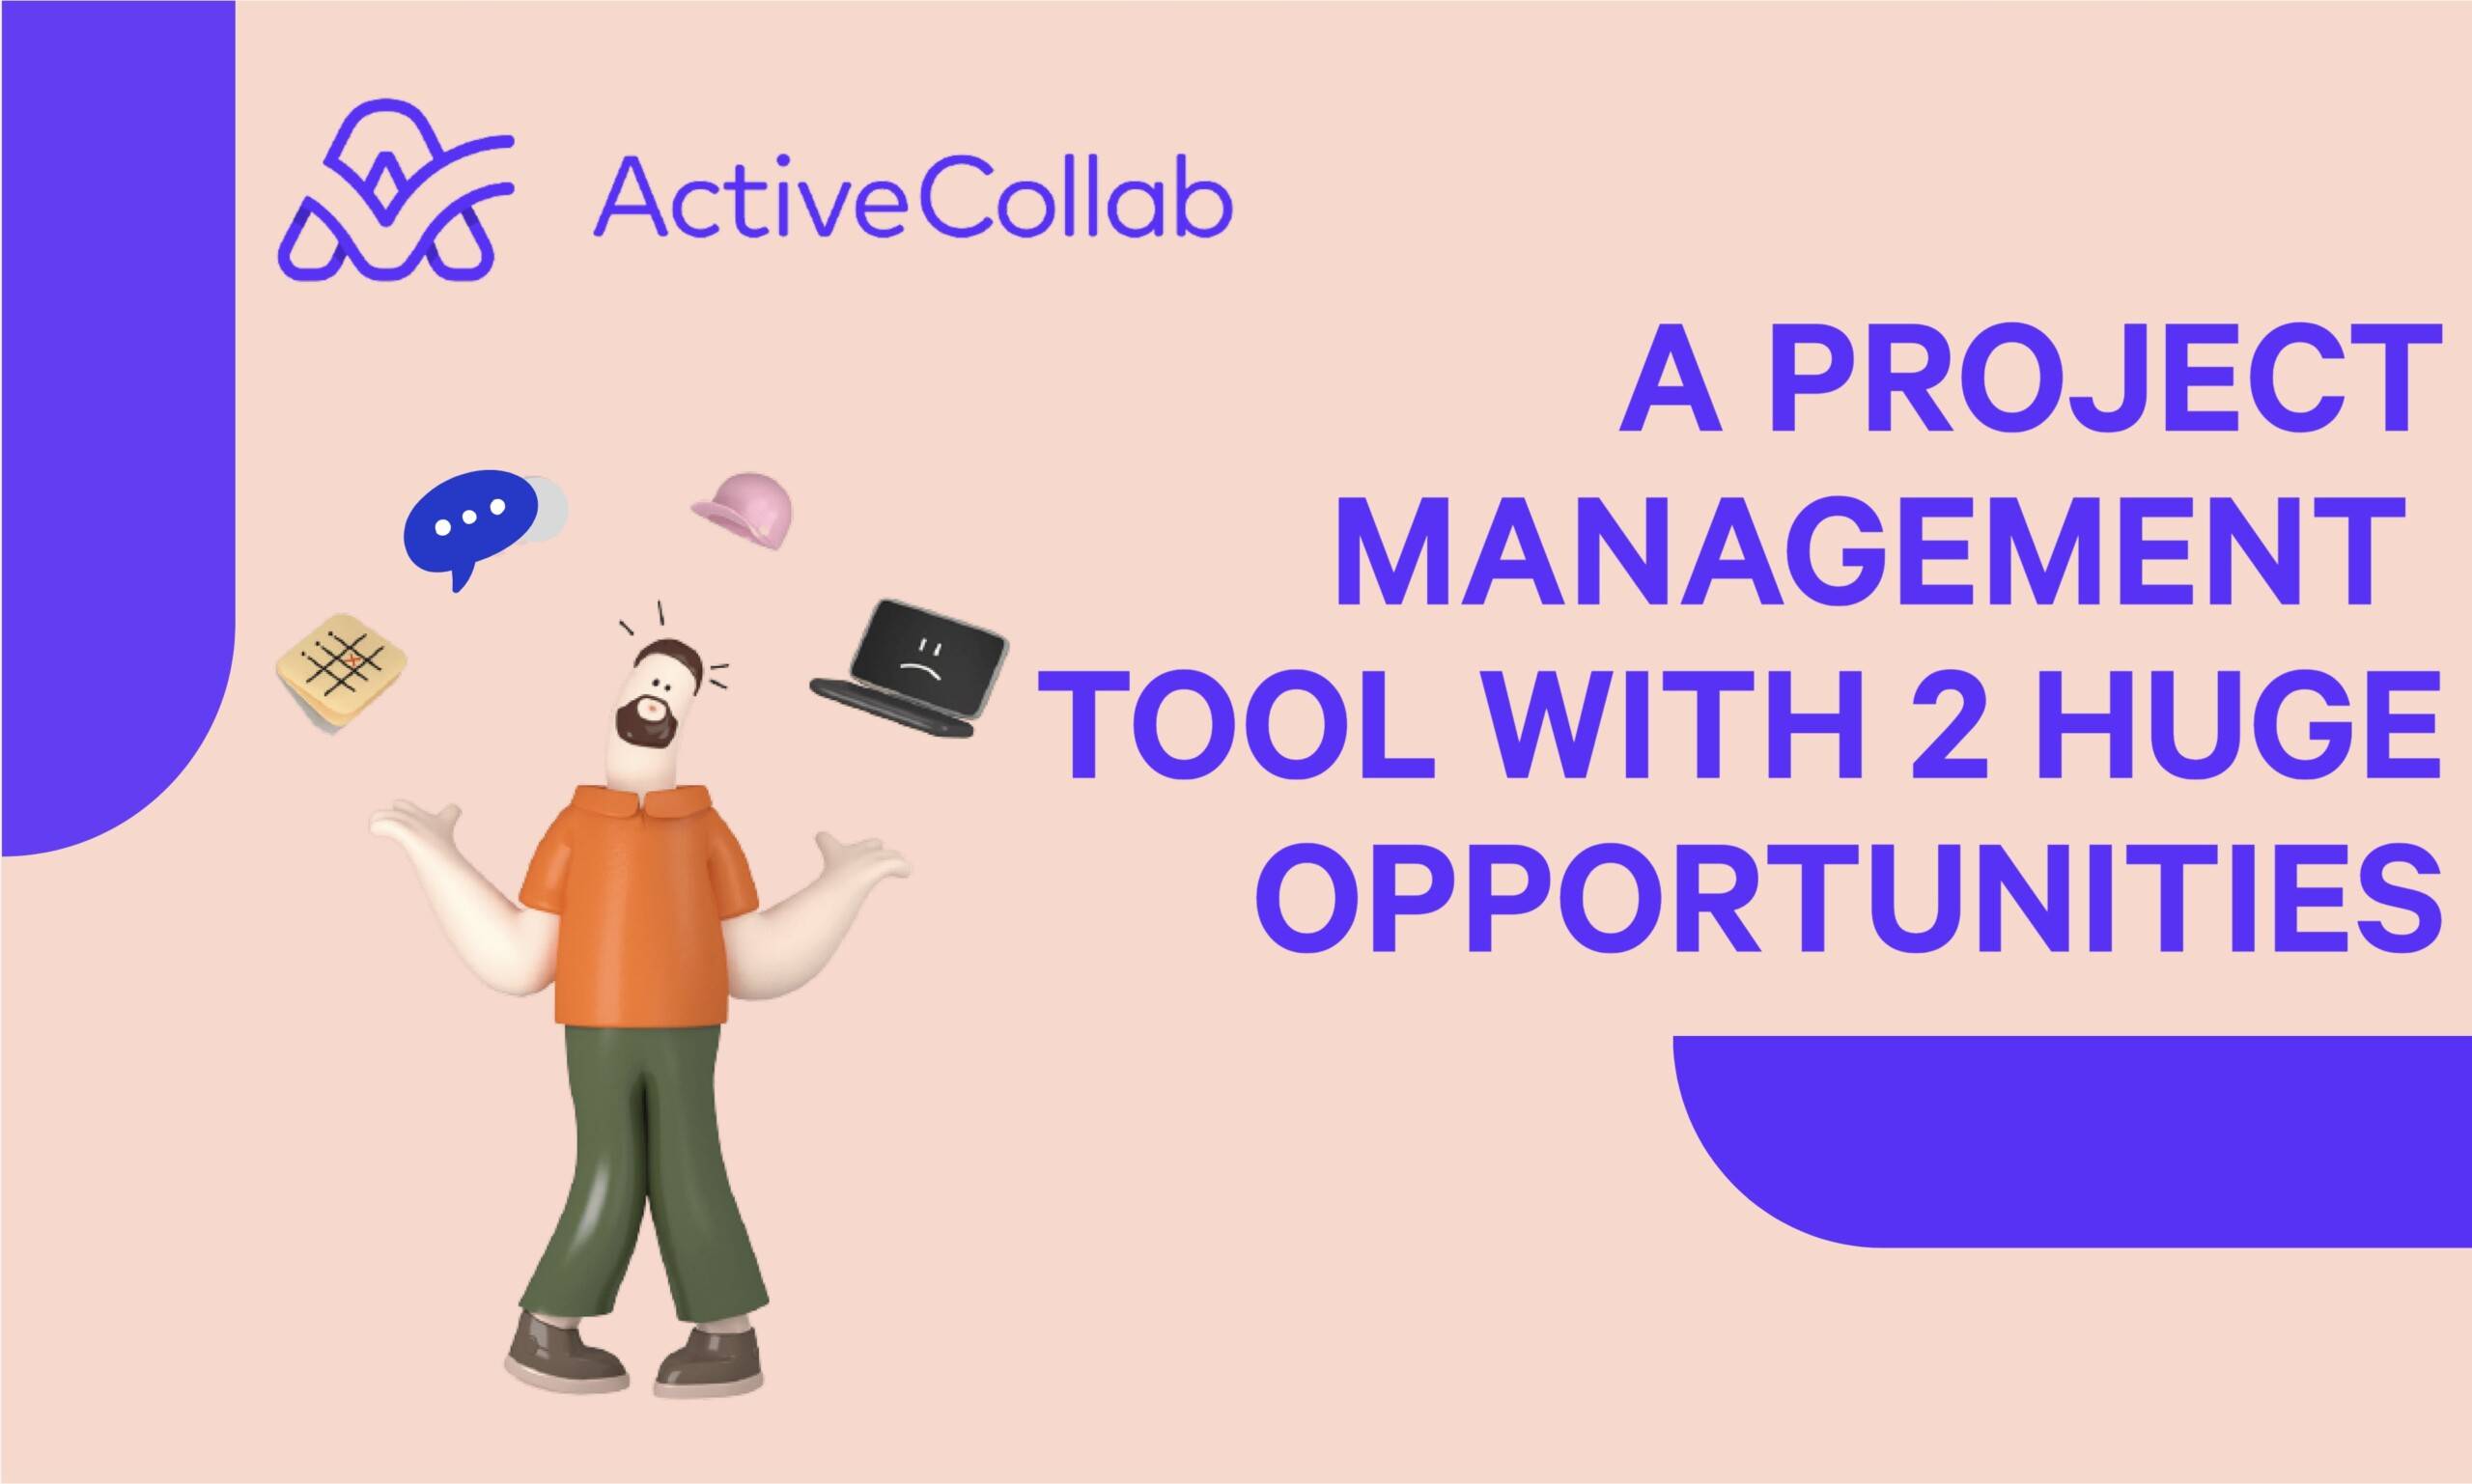 ActiveCollab - A project management tool with 2 HUGE OPPORTUNITIES